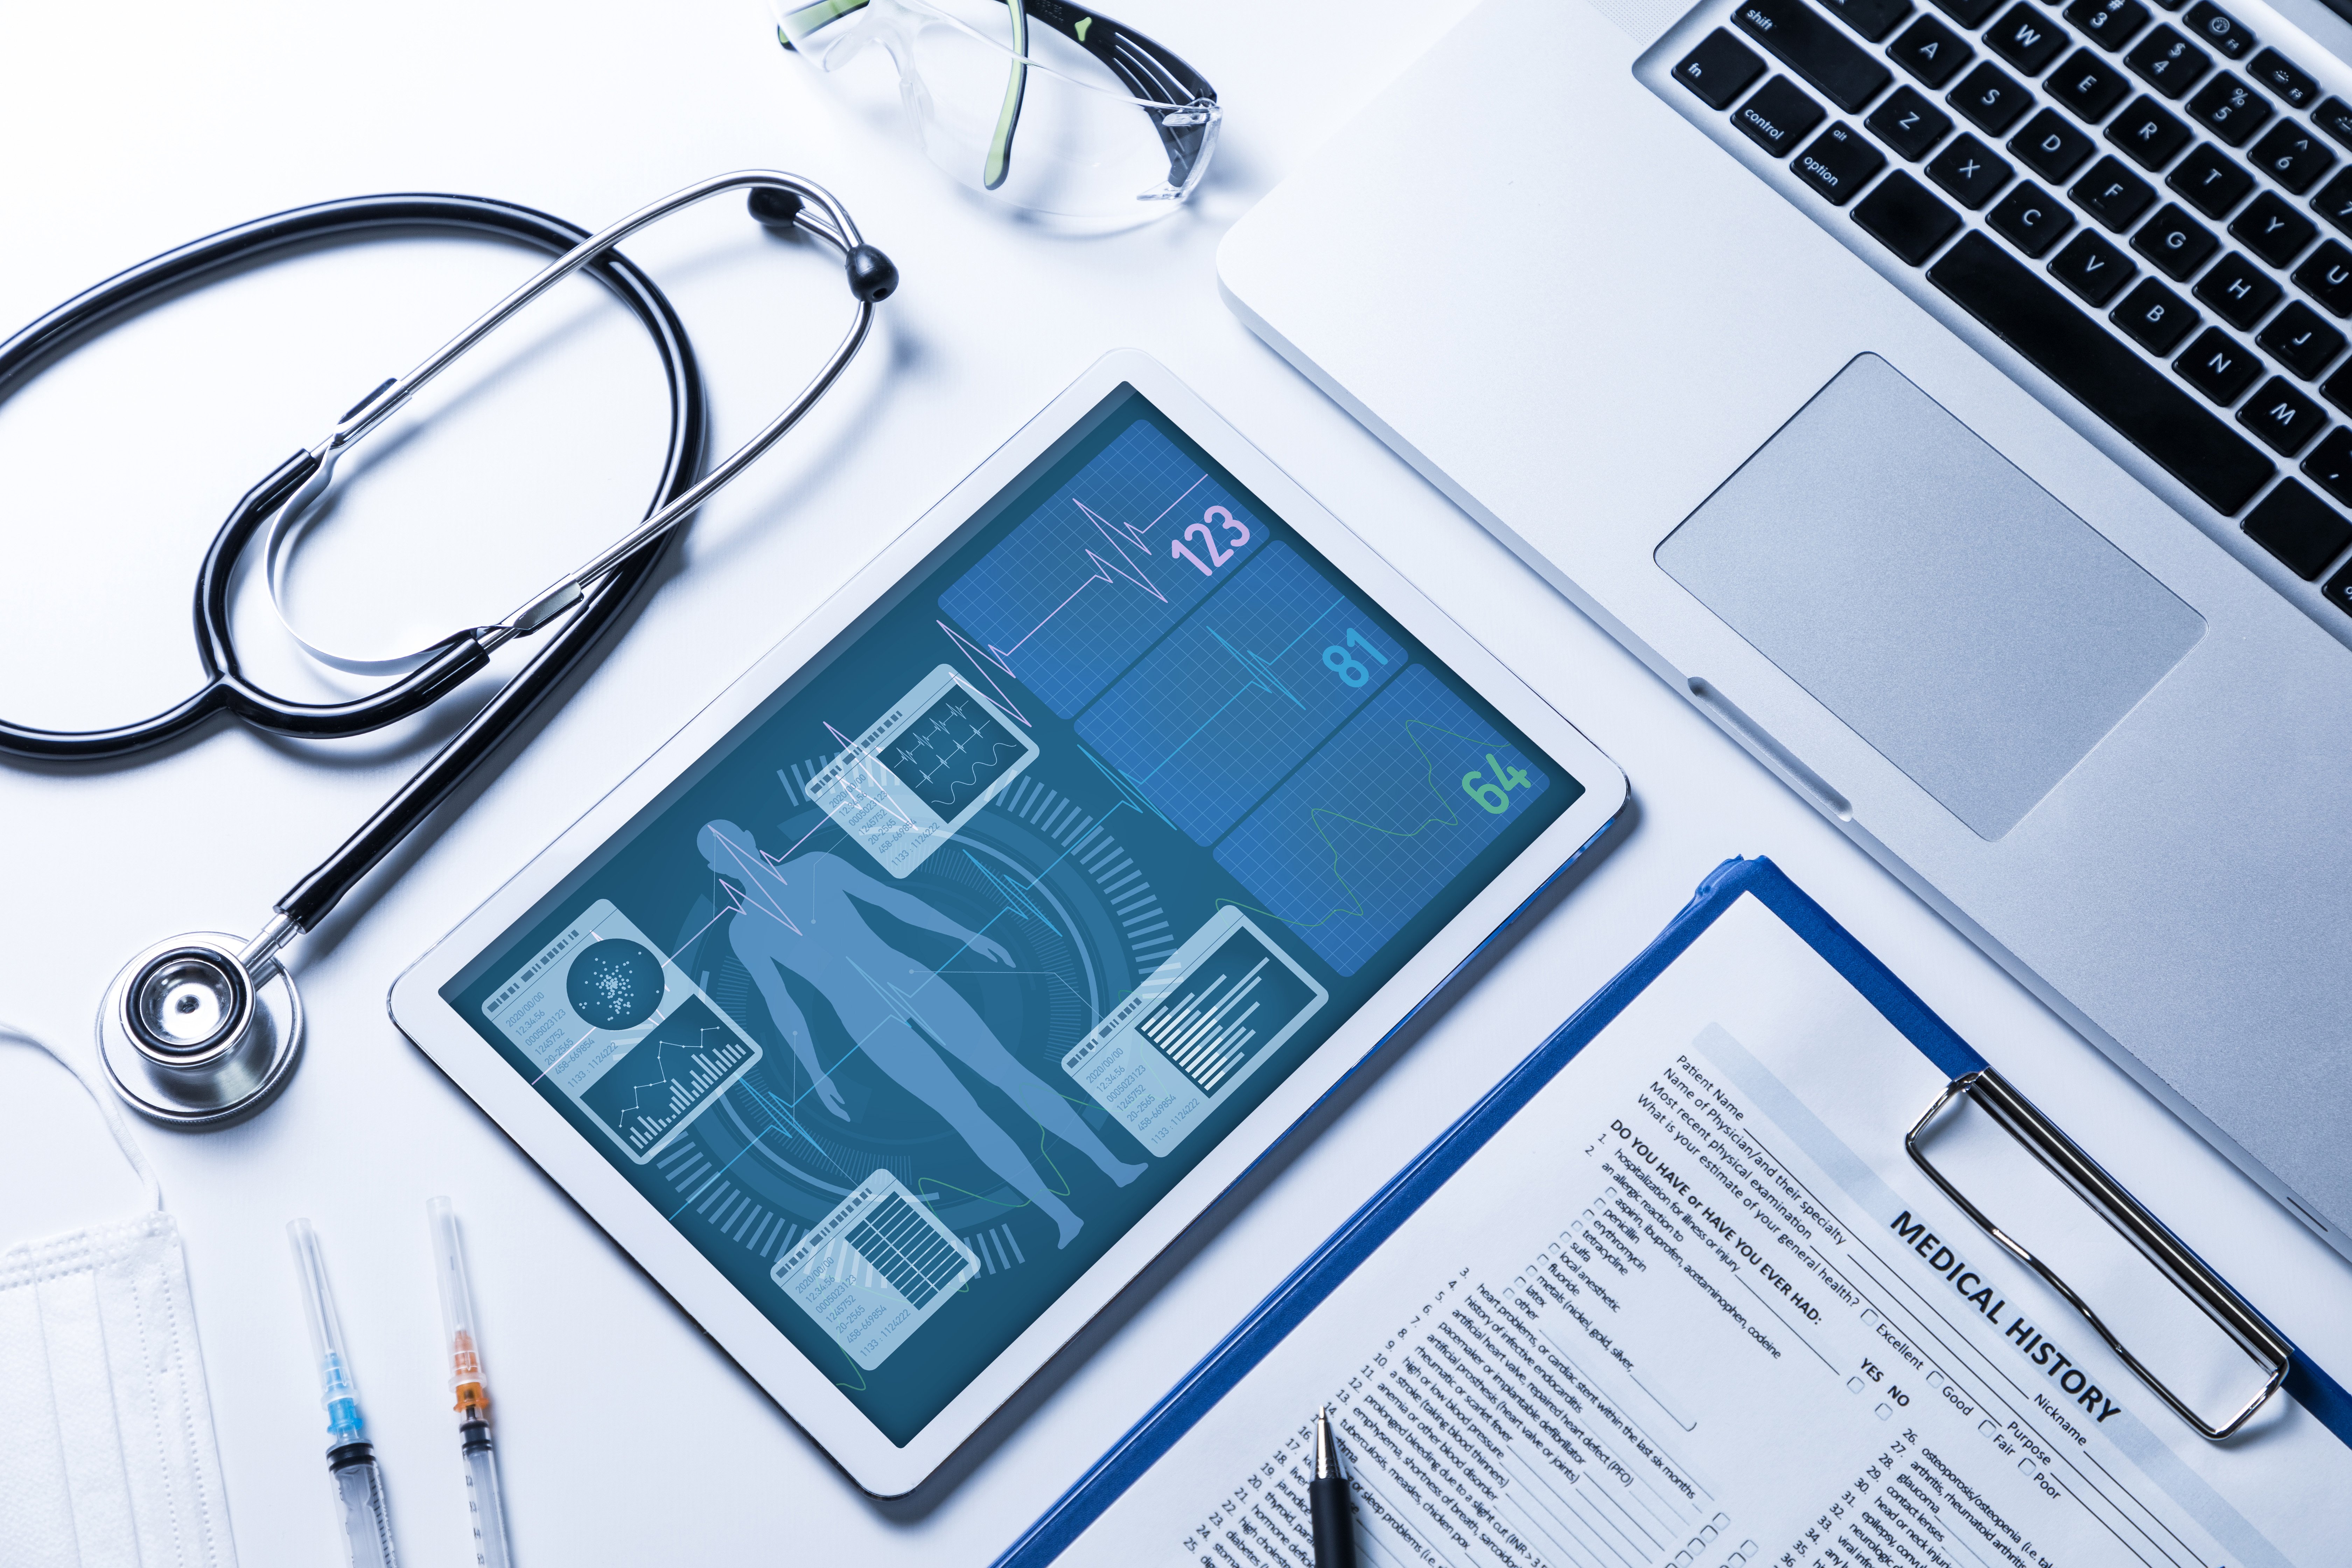 Tablet showing vital signs next to laptop and stethoscope